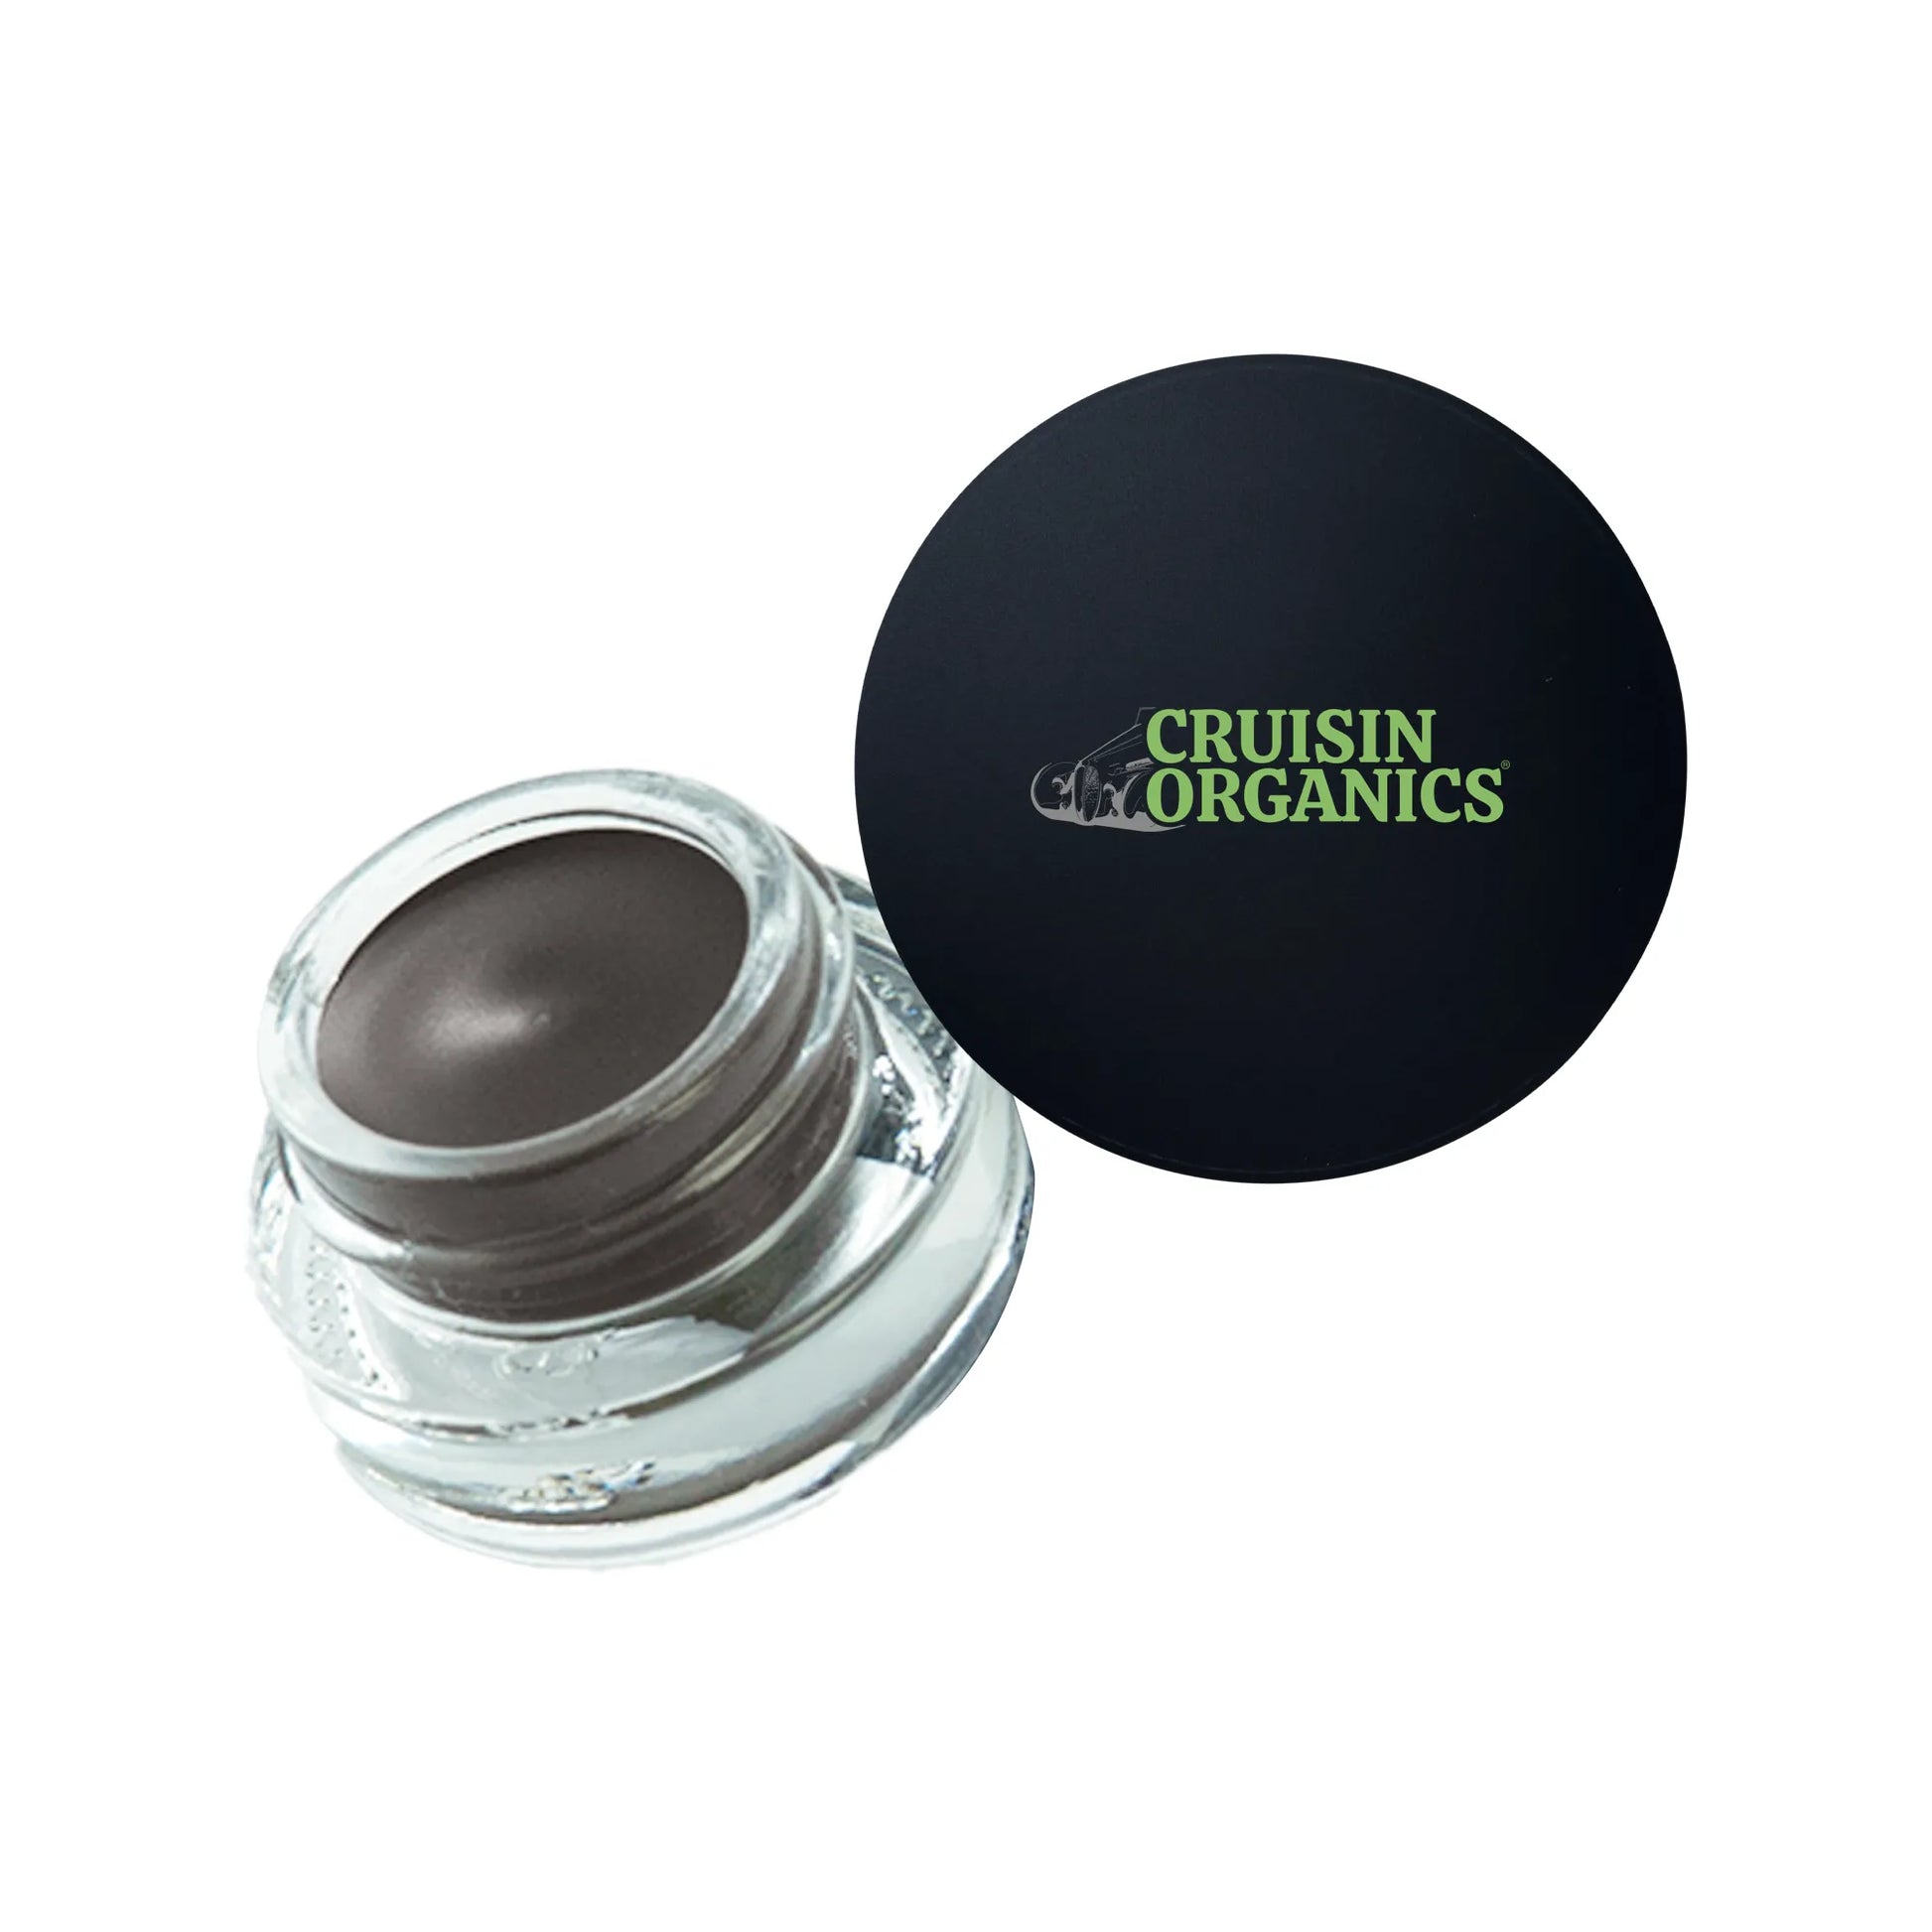 The buildable formula to get the perfect brows. A buildable, multitasking product that will get your brows shaped and filled in perfectly. Create your ideal, defined brows with our Cruisin Organics Deep Brown Brow Pomade by sculpting, shading, and filling. Best for oily skin types to control and keep your brows looking in the best shape!